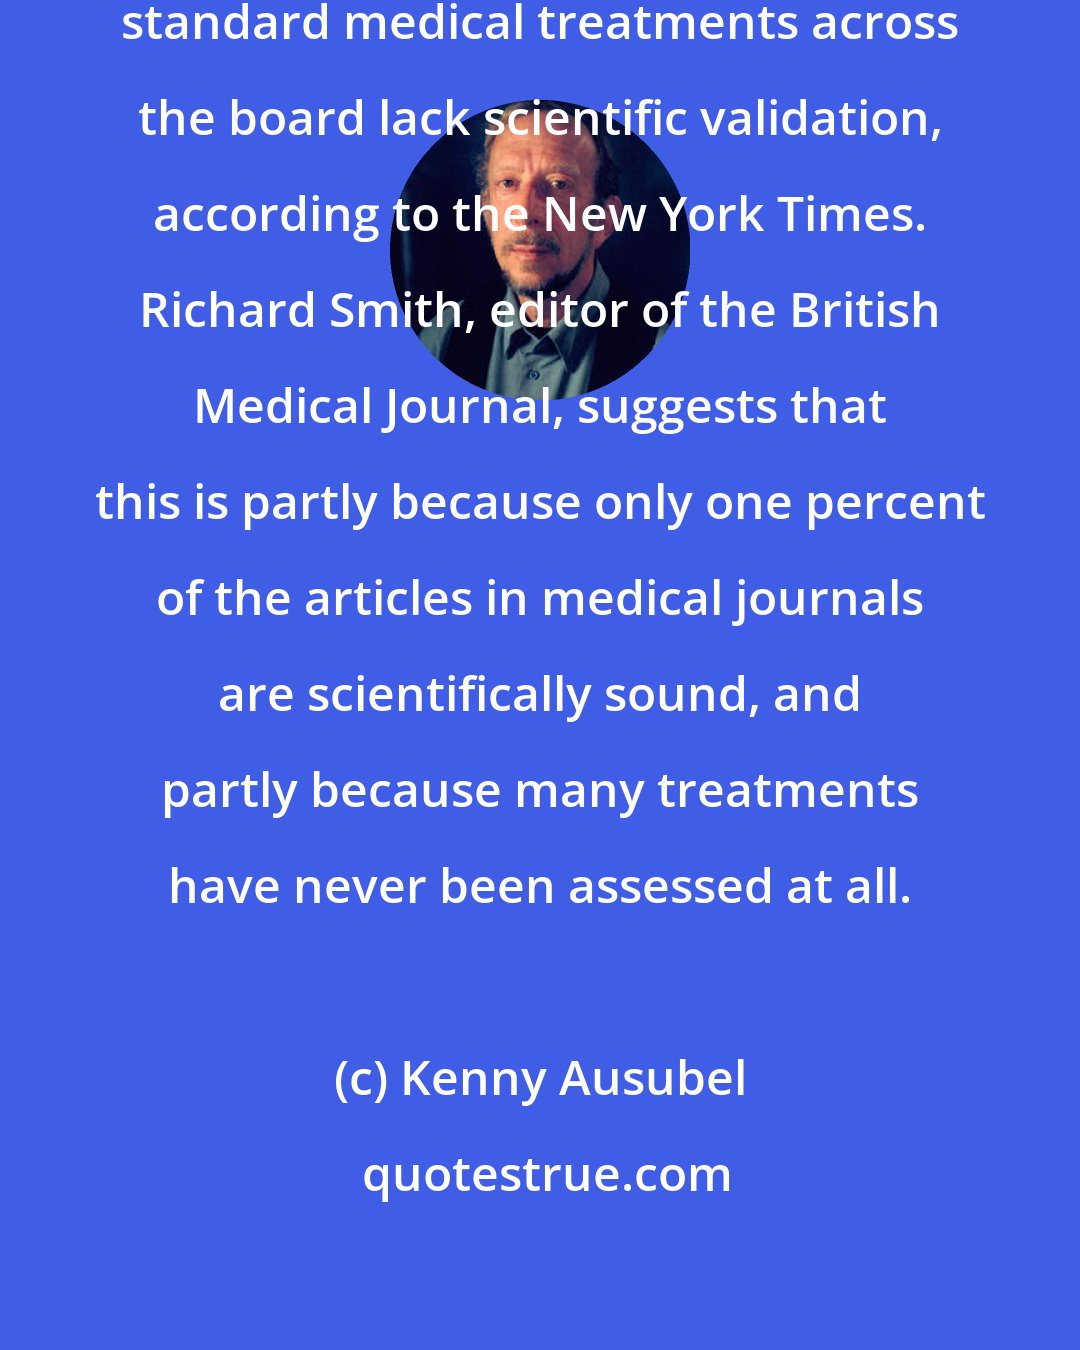 Kenny Ausubel: Amazingly, 85 percent of prescribed standard medical treatments across the board lack scientific validation, according to the New York Times. Richard Smith, editor of the British Medical Journal, suggests that this is partly because only one percent of the articles in medical journals are scientifically sound, and partly because many treatments have never been assessed at all.